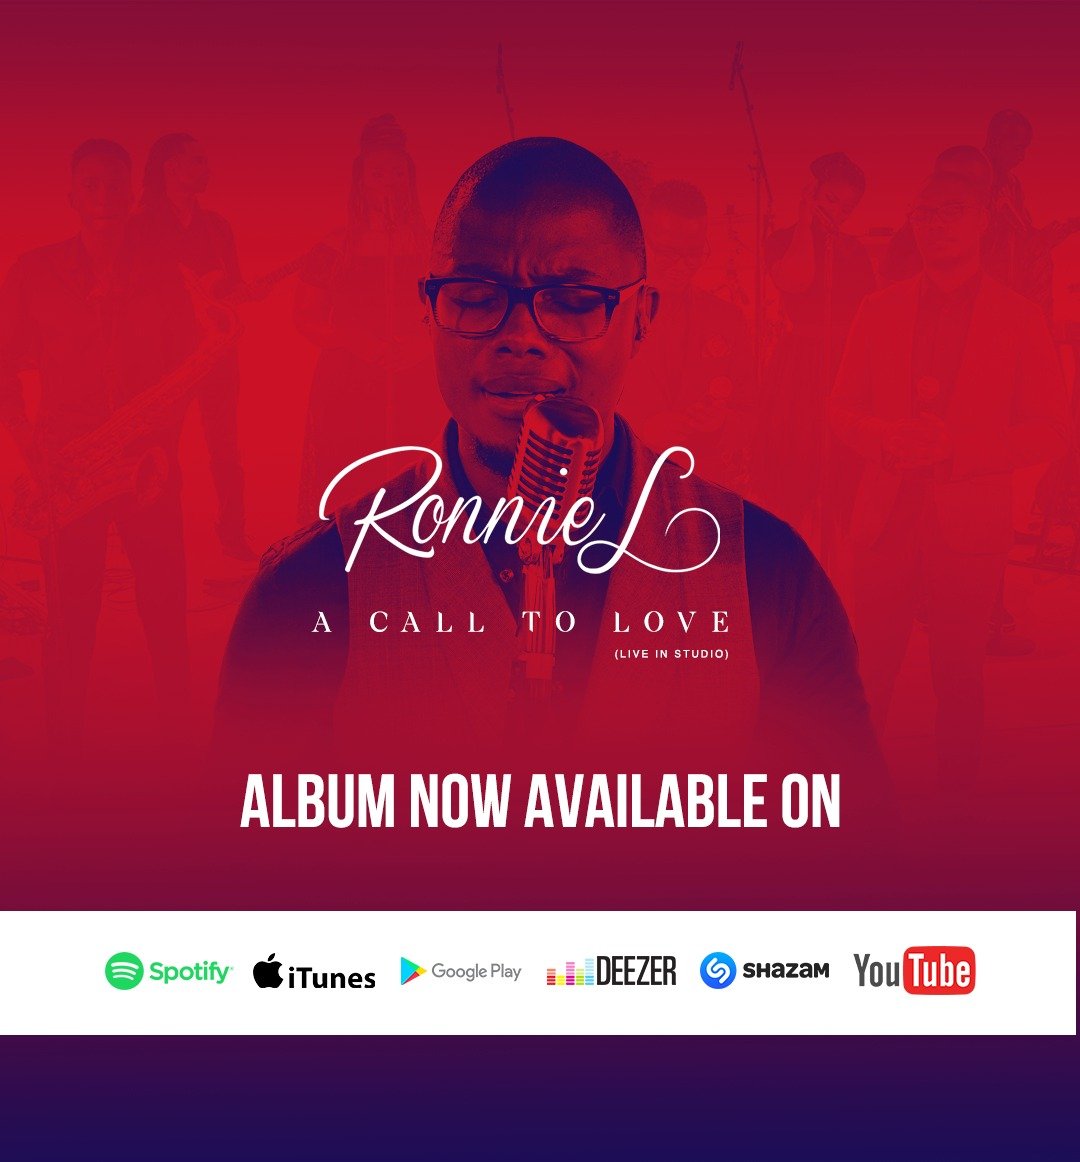 @RonnieLMulaudzi is a Worshiper at Heart. #ACallToLove Album Out Now! For Bookings Email BOOKINGS@RONNIEMUSIC.CO.ZA